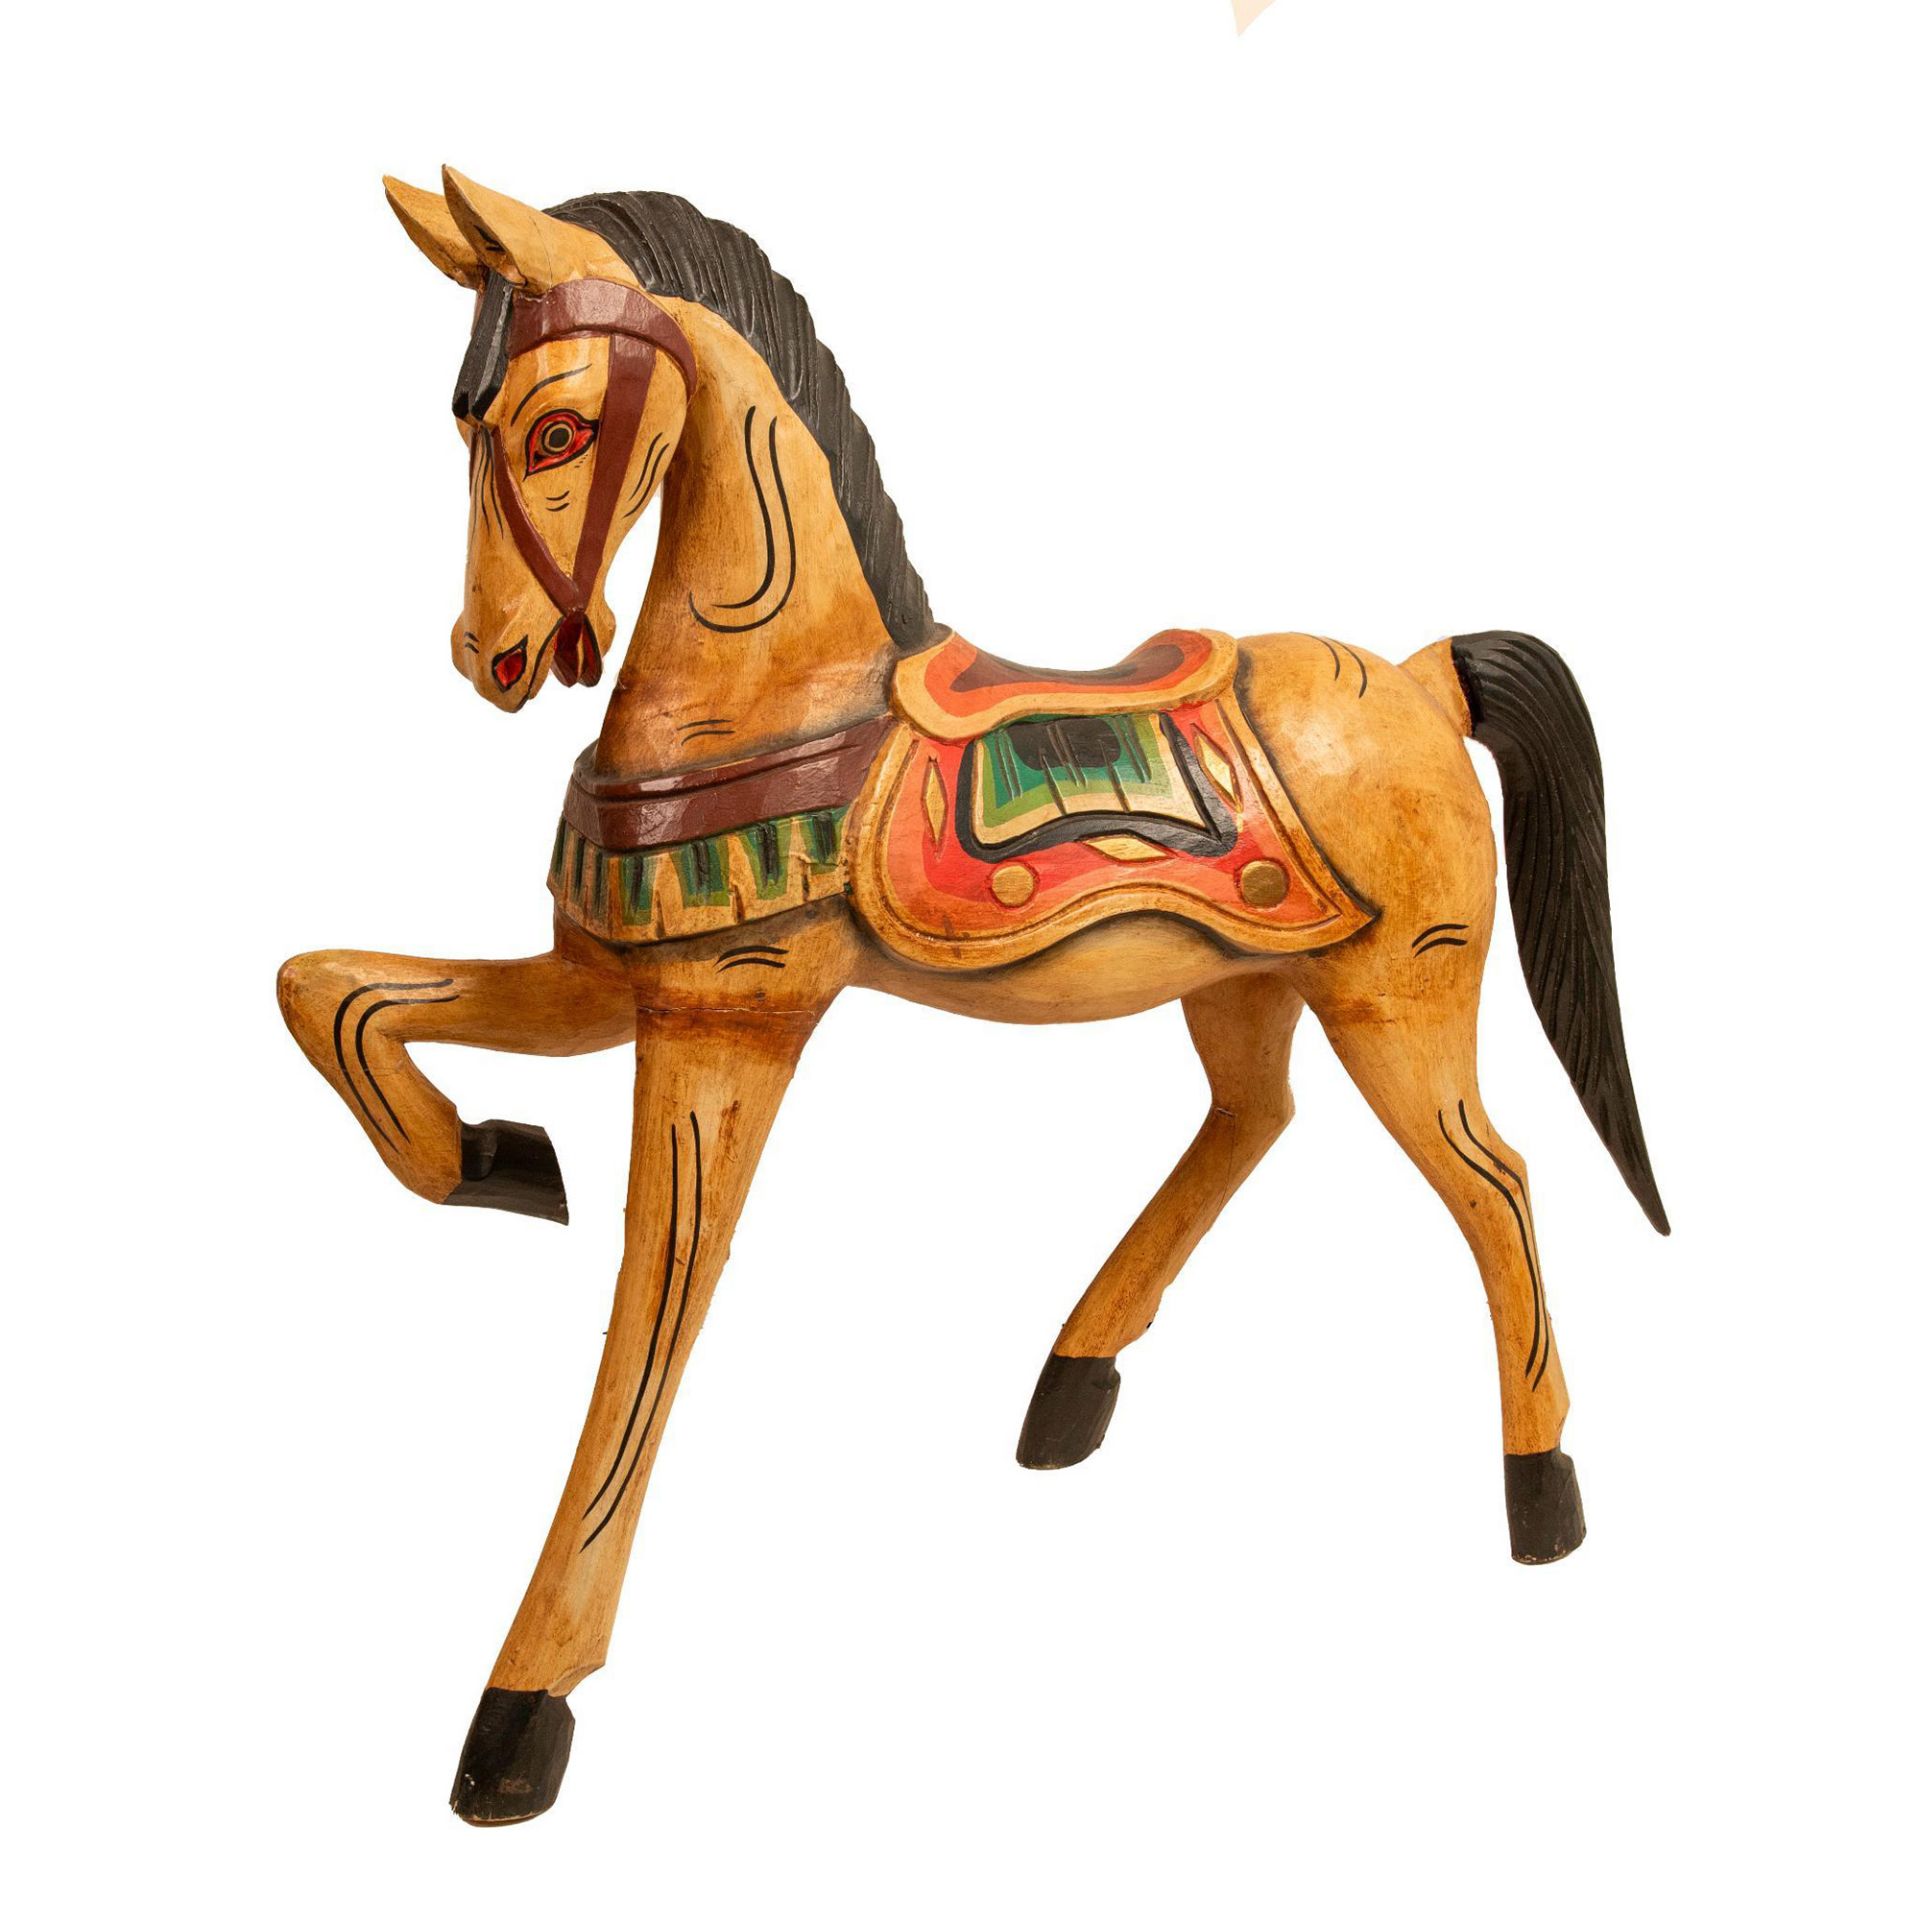 Vintage Wooden Carousel Style Horse Statue - Image 2 of 5